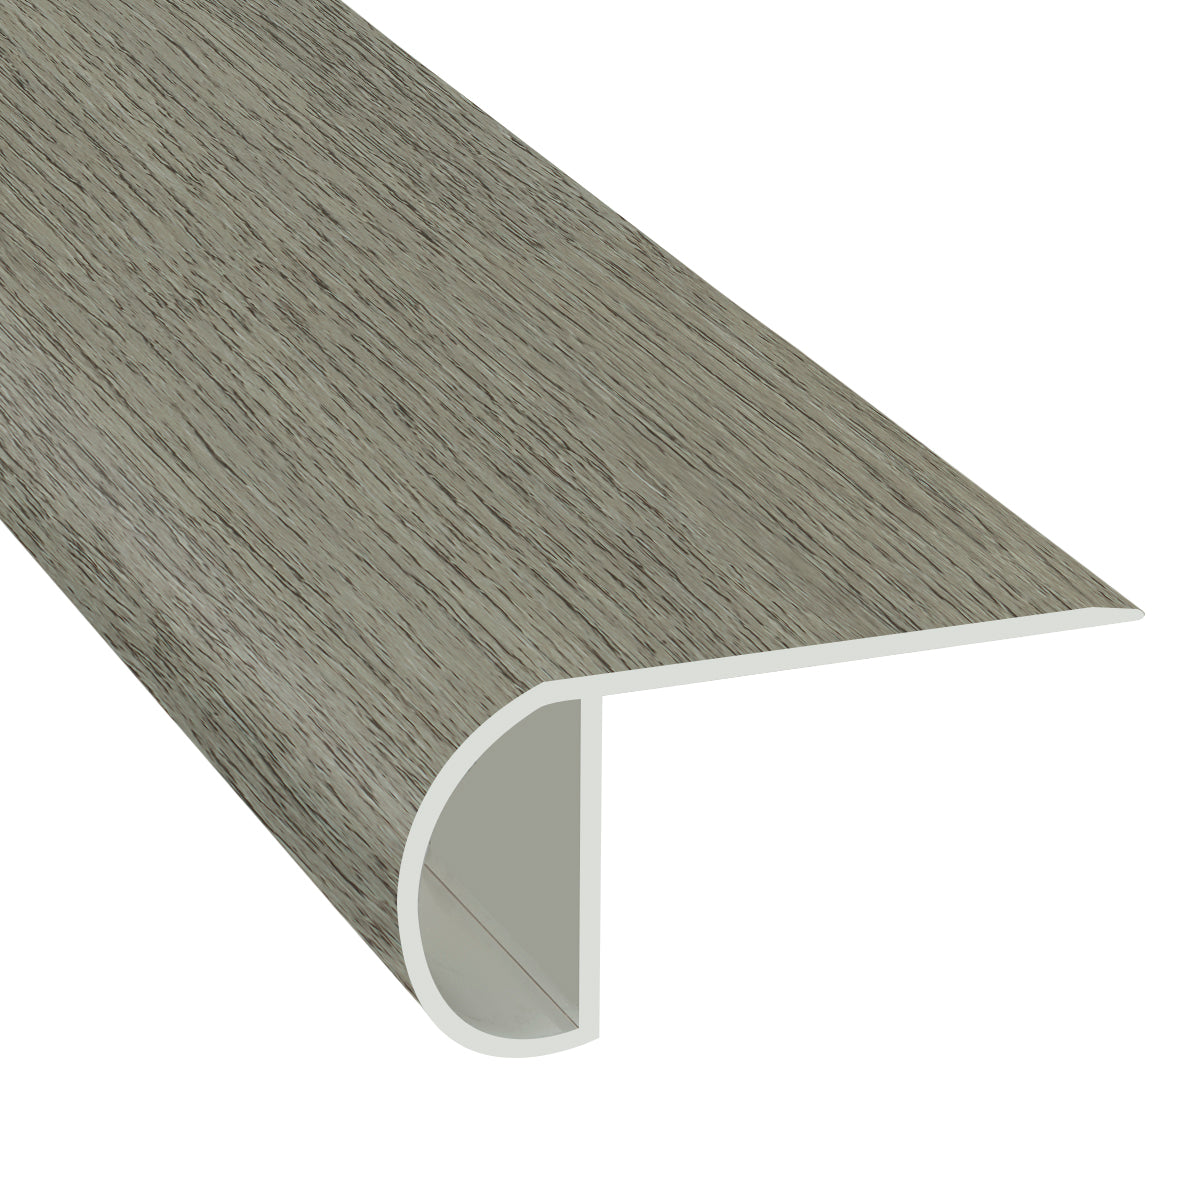 Windswept 1.03 in. Thick x 2.23 in. Width x 94 in. Length Vinyl Overlap Stair Nose Molding